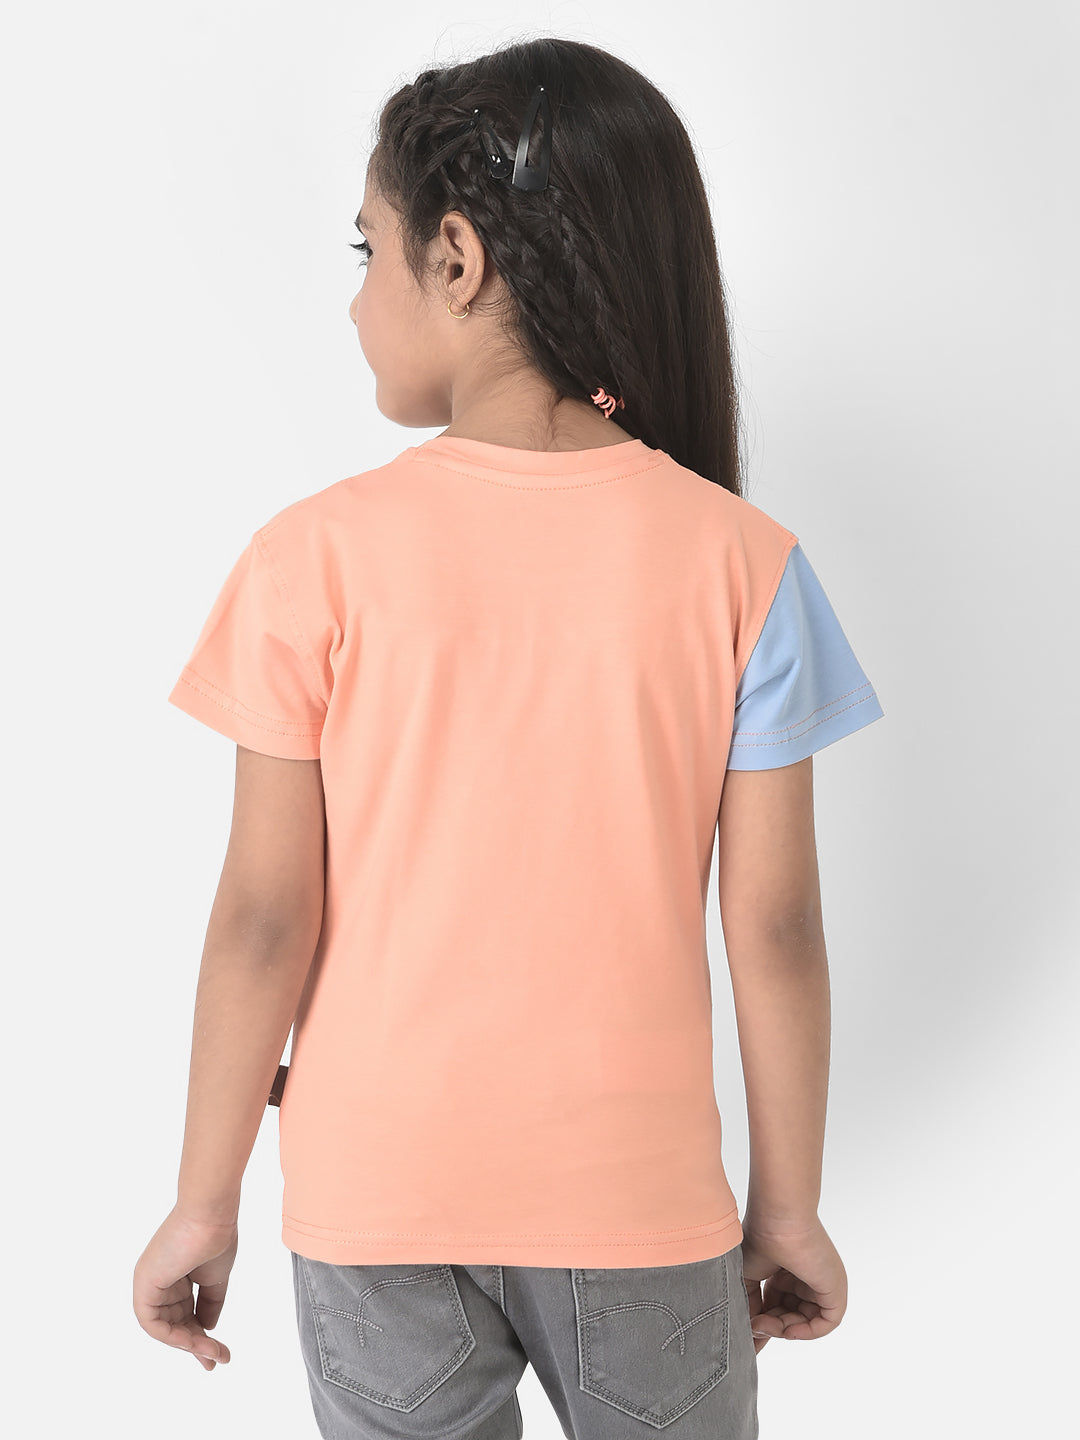  Multi-Coloured T-Shirt with Colour-Block Styling